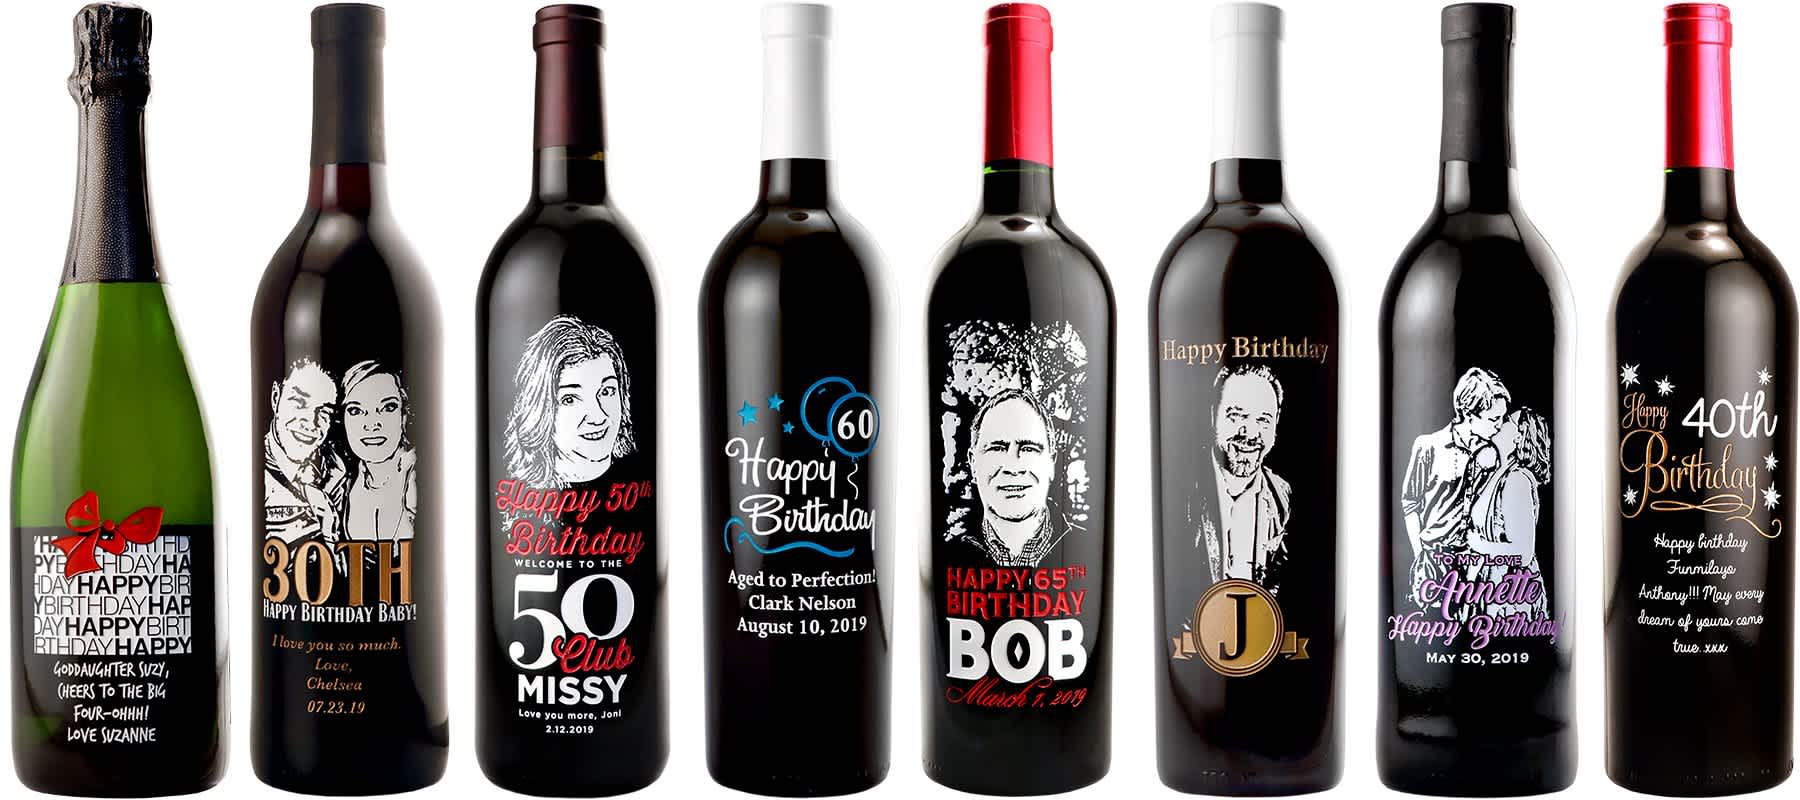 Personalized birthday wine bottles by Etching Expressions